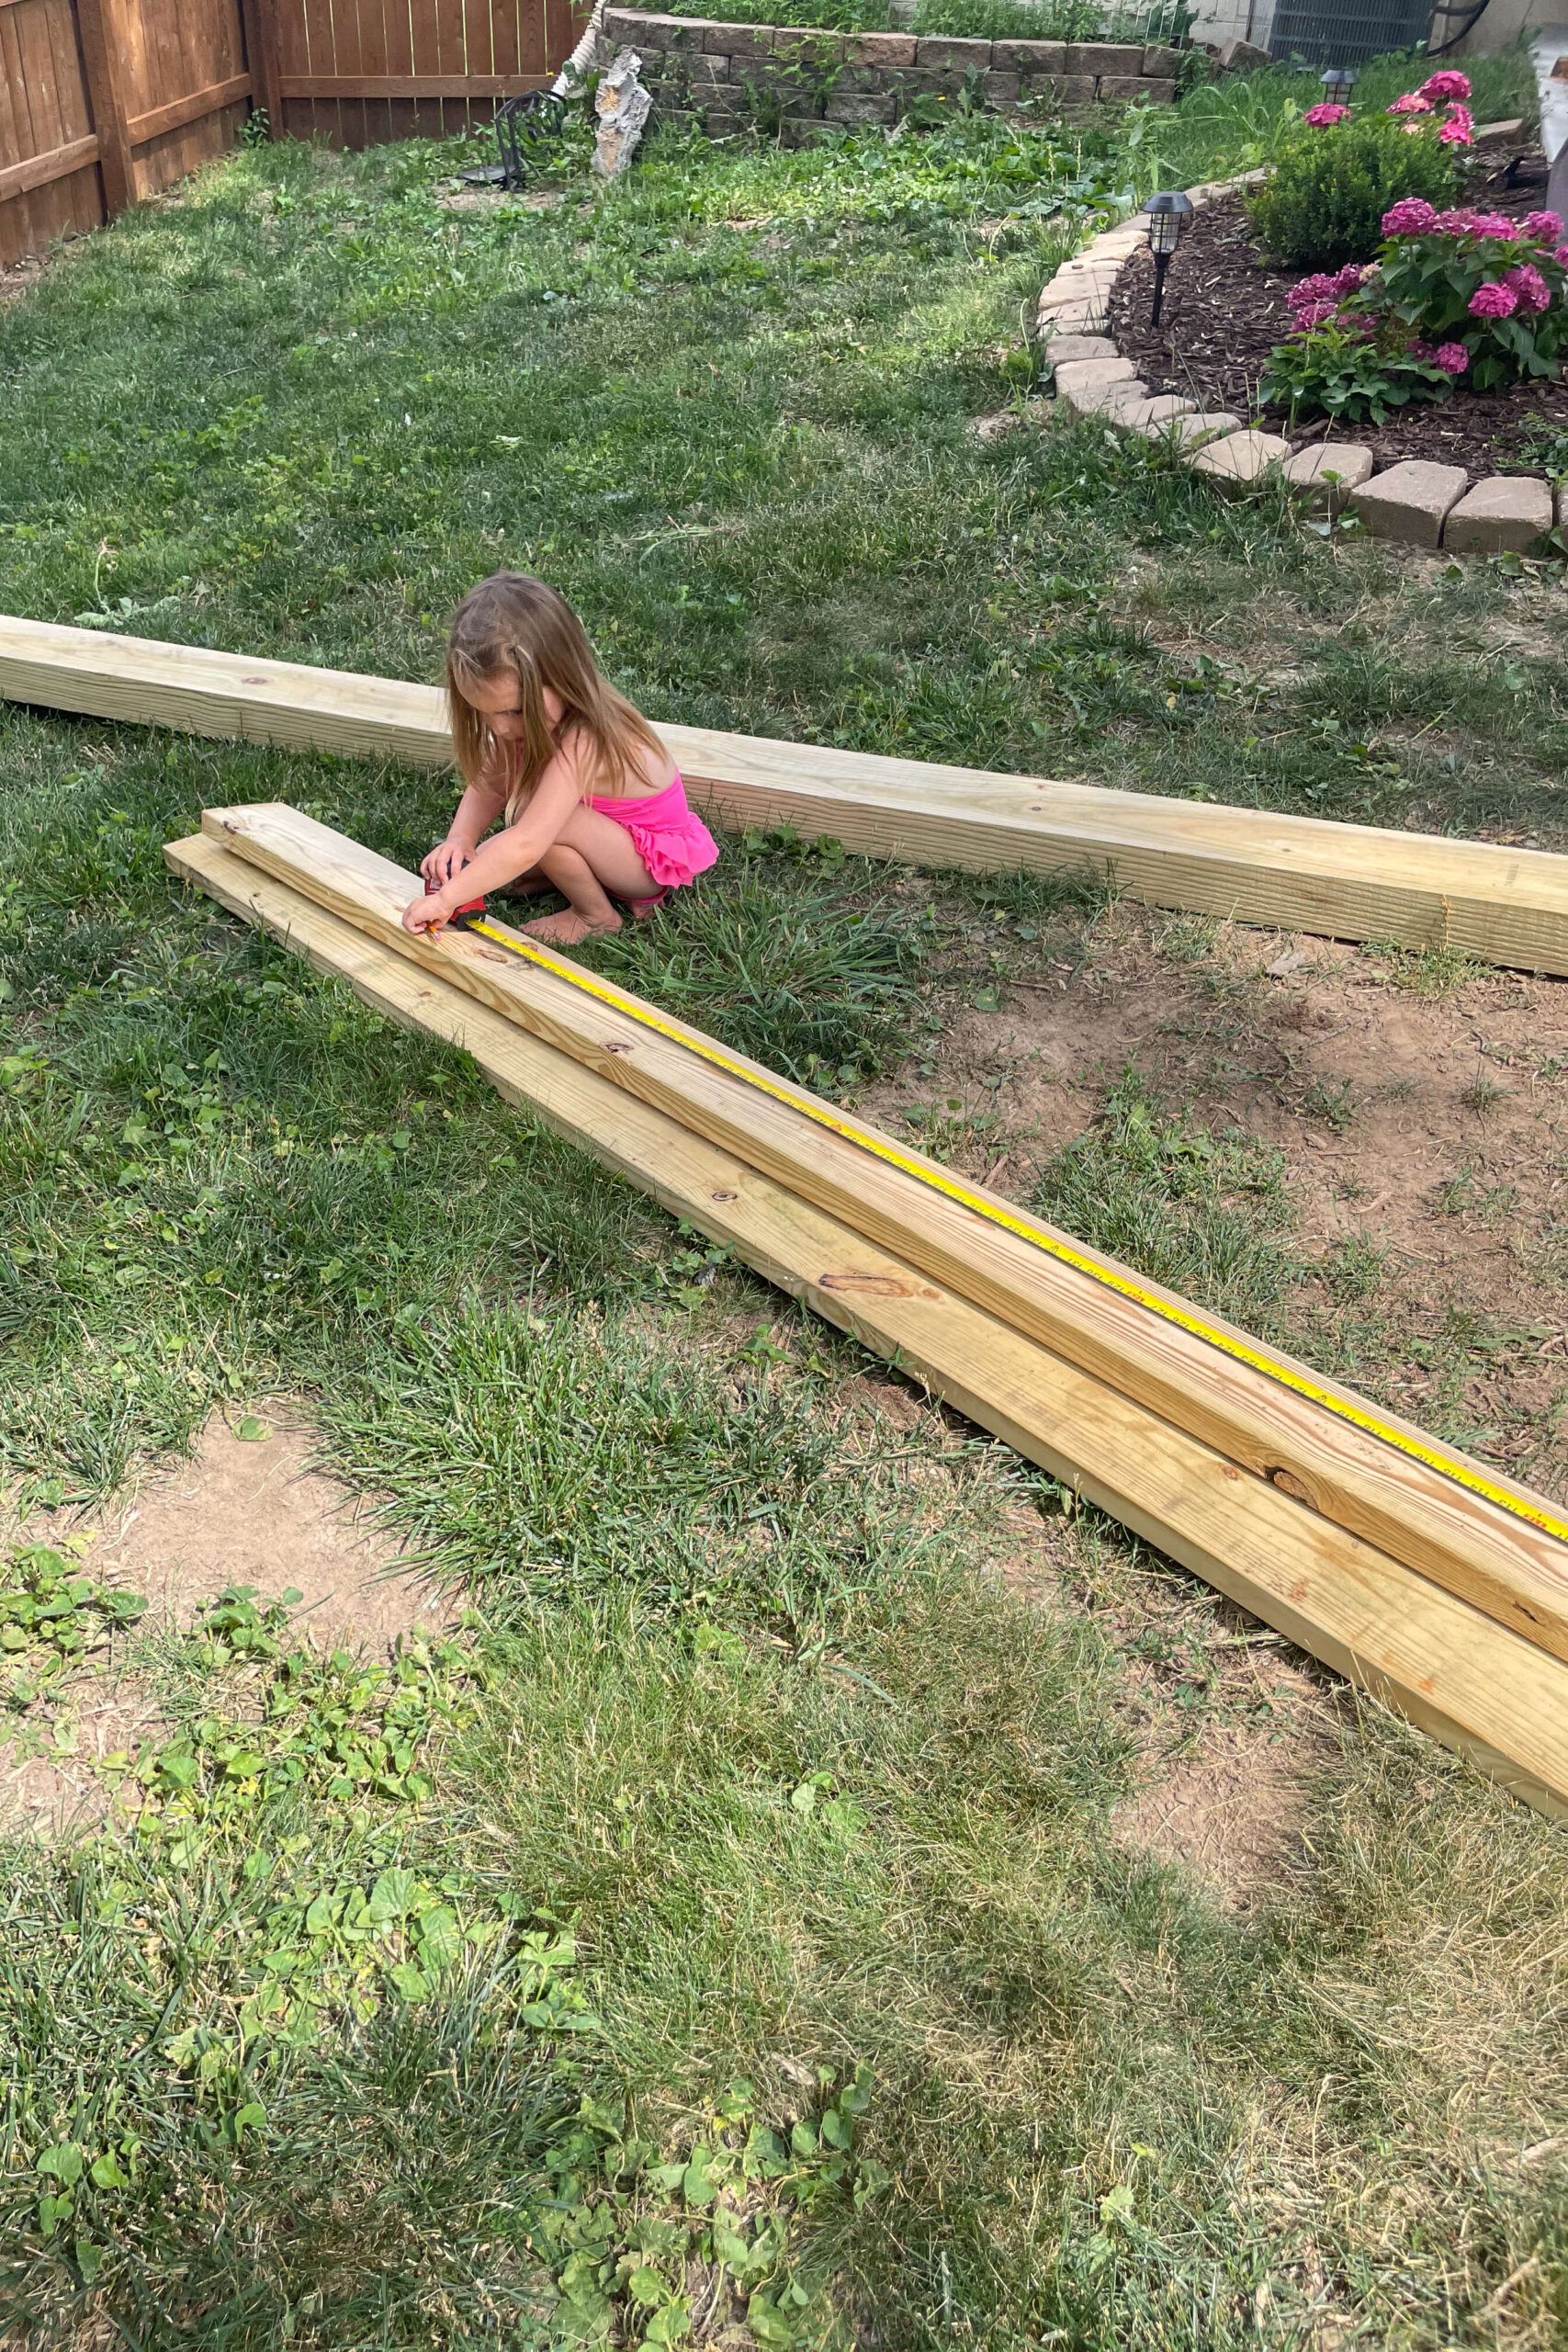 Measuring wood for building a backyard hammock stand.